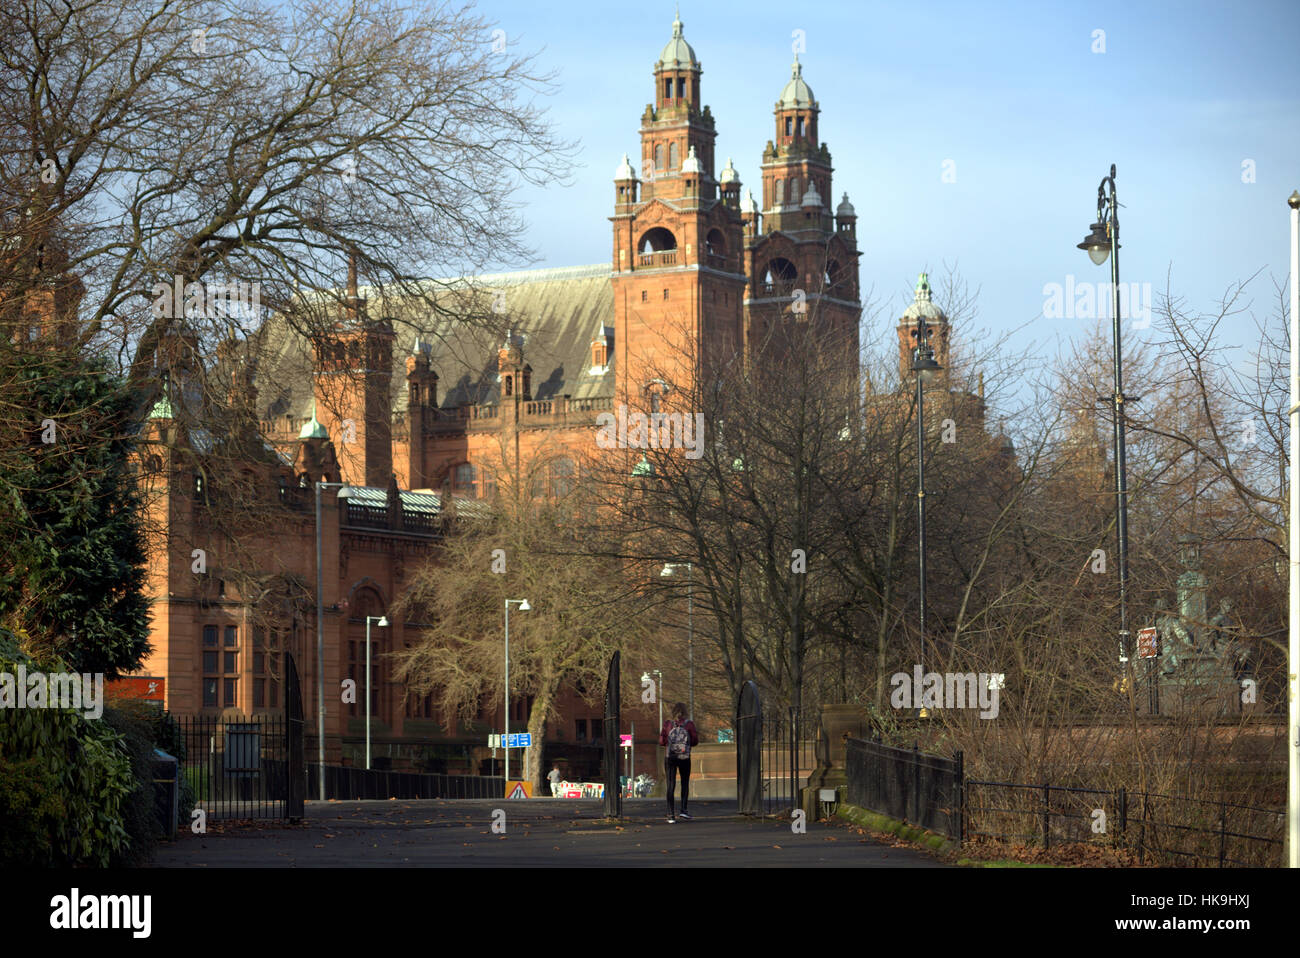 Glasgow Kelvingrove art galleries museum  drom Kelvingrove park which contains  the museum in the Park area Stock Photo